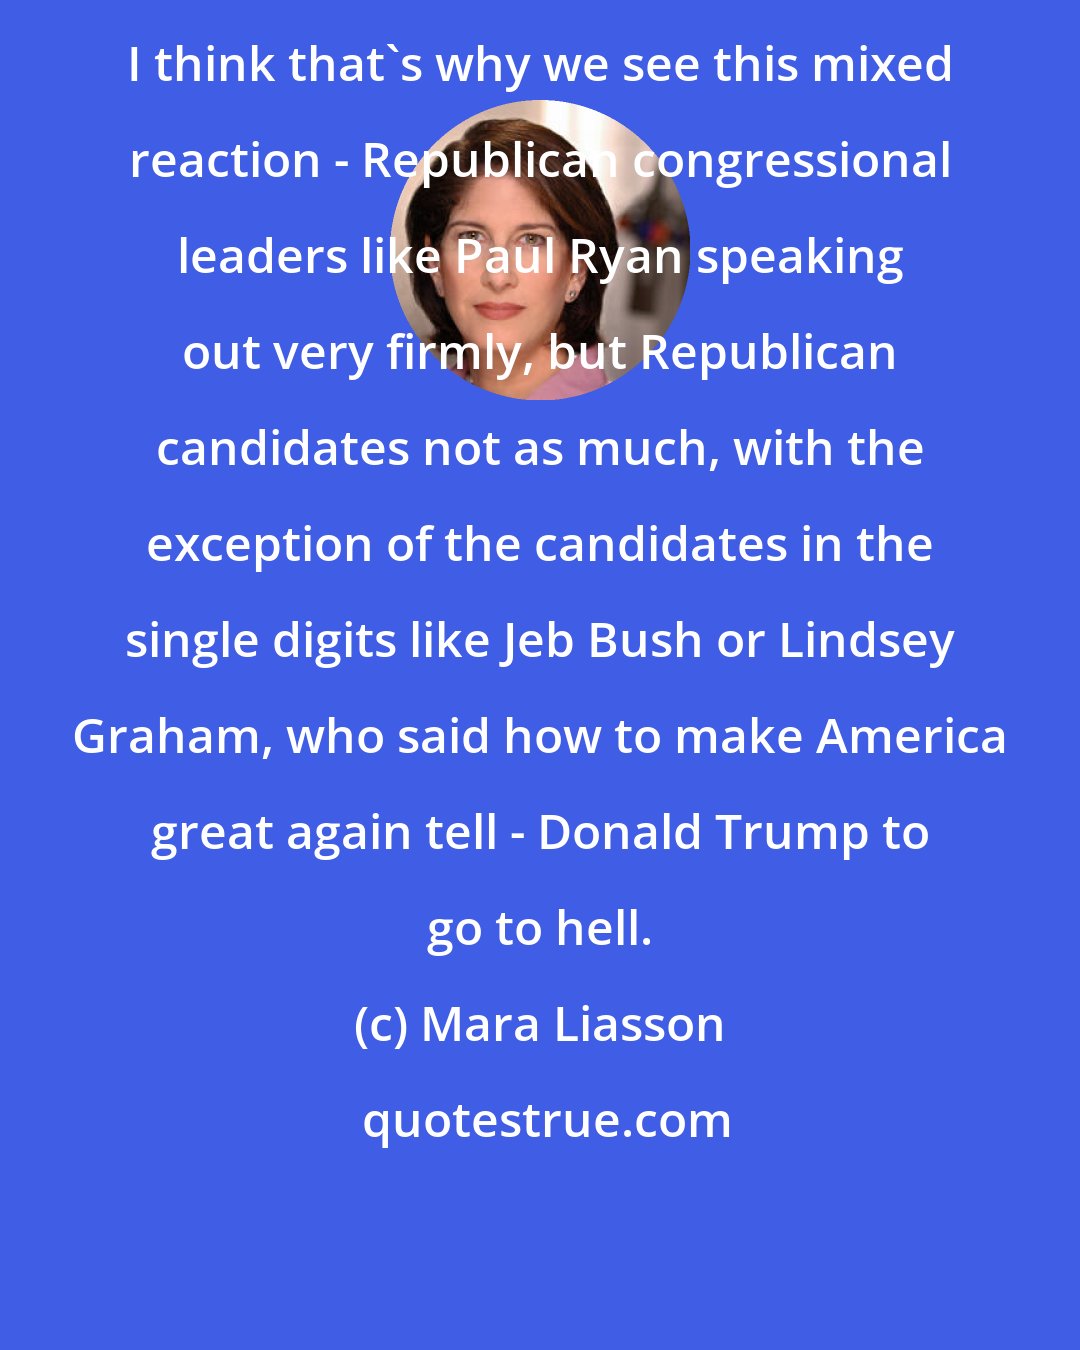 Mara Liasson: I think that's why we see this mixed reaction - Republican congressional leaders like Paul Ryan speaking out very firmly, but Republican candidates not as much, with the exception of the candidates in the single digits like Jeb Bush or Lindsey Graham, who said how to make America great again tell - Donald Trump to go to hell.